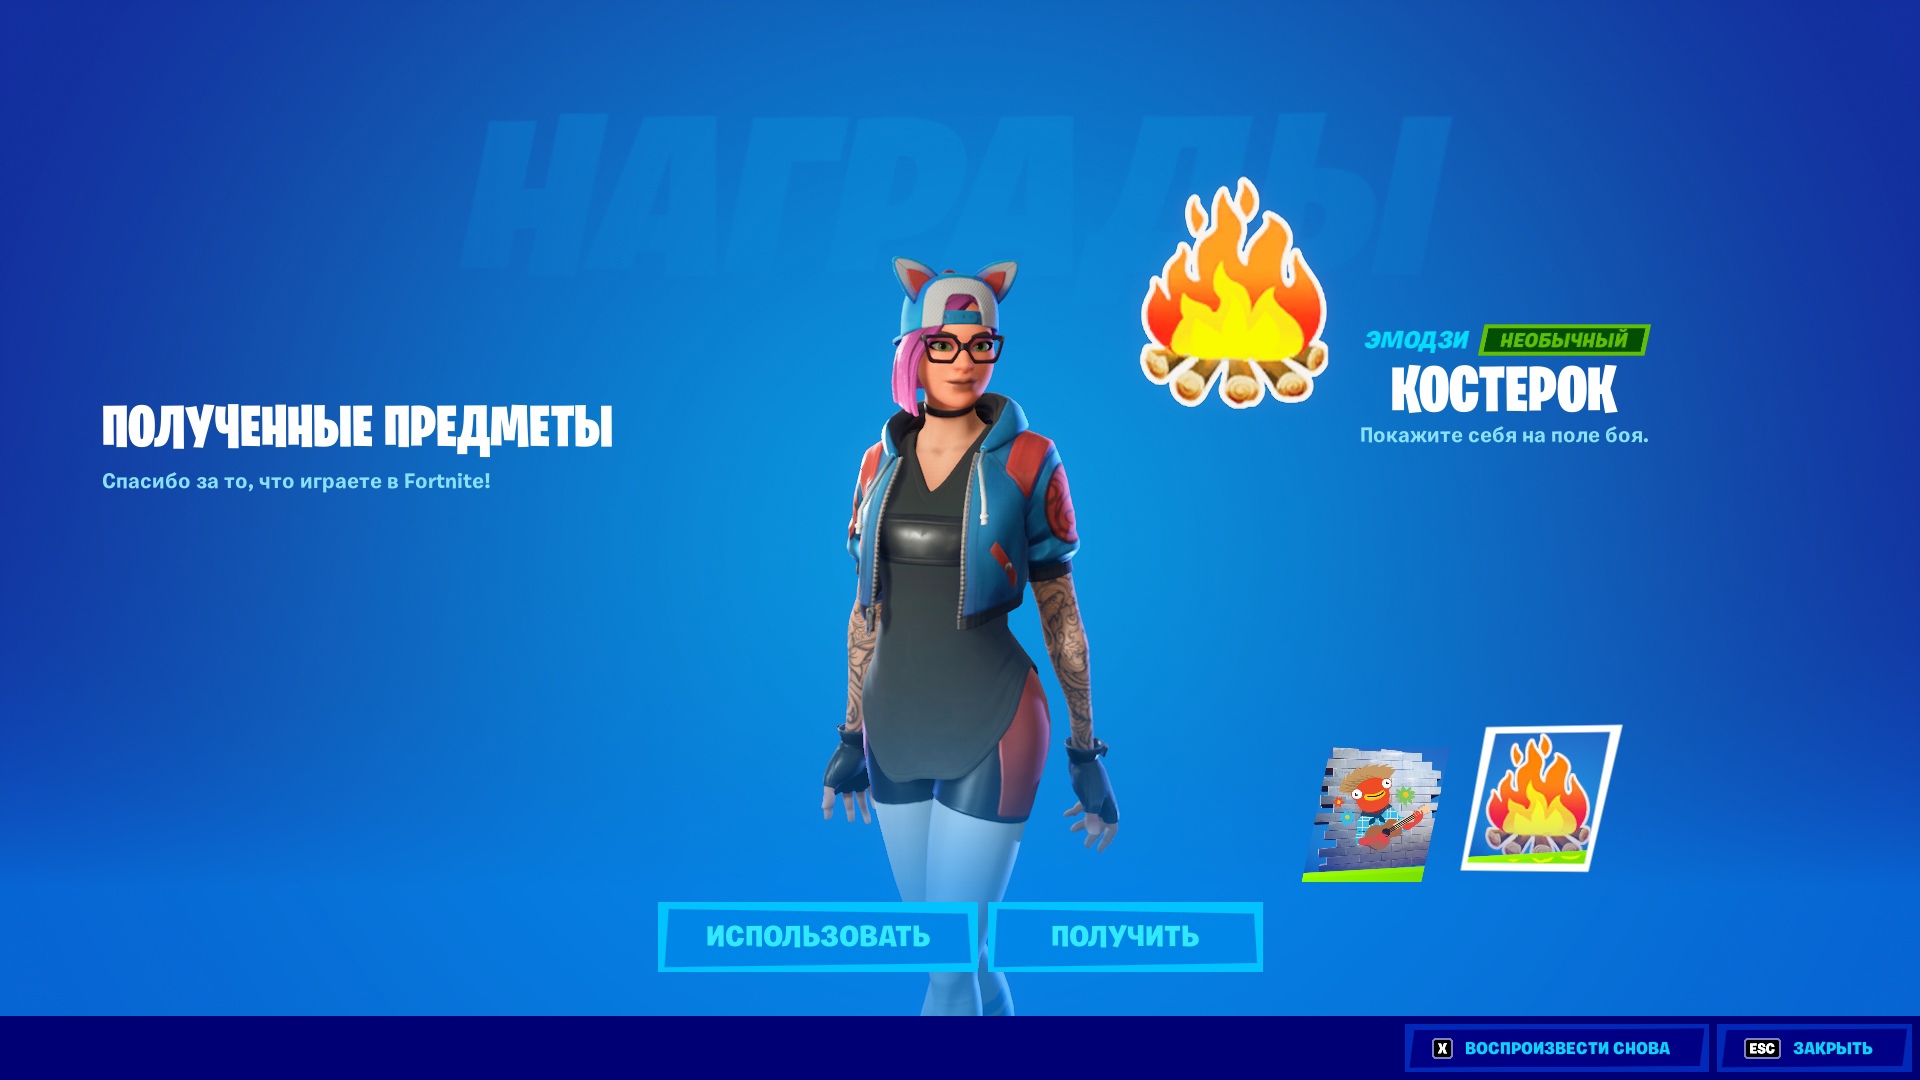 You can get a free spray and an emoji in Fortnite  